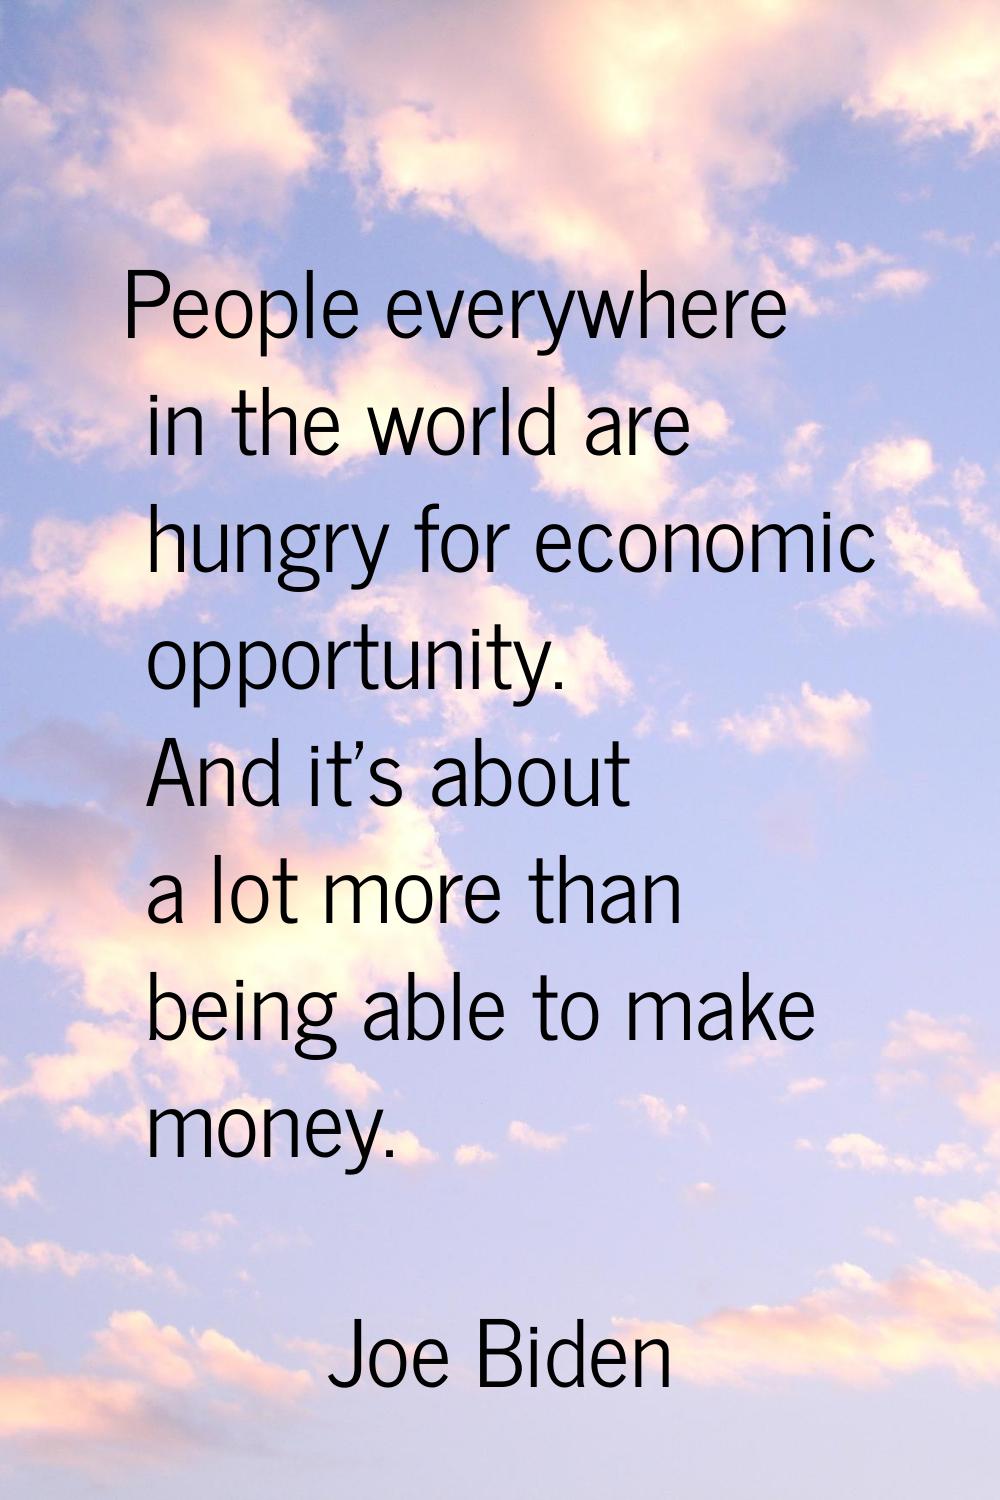 People everywhere in the world are hungry for economic opportunity. And it's about a lot more than 